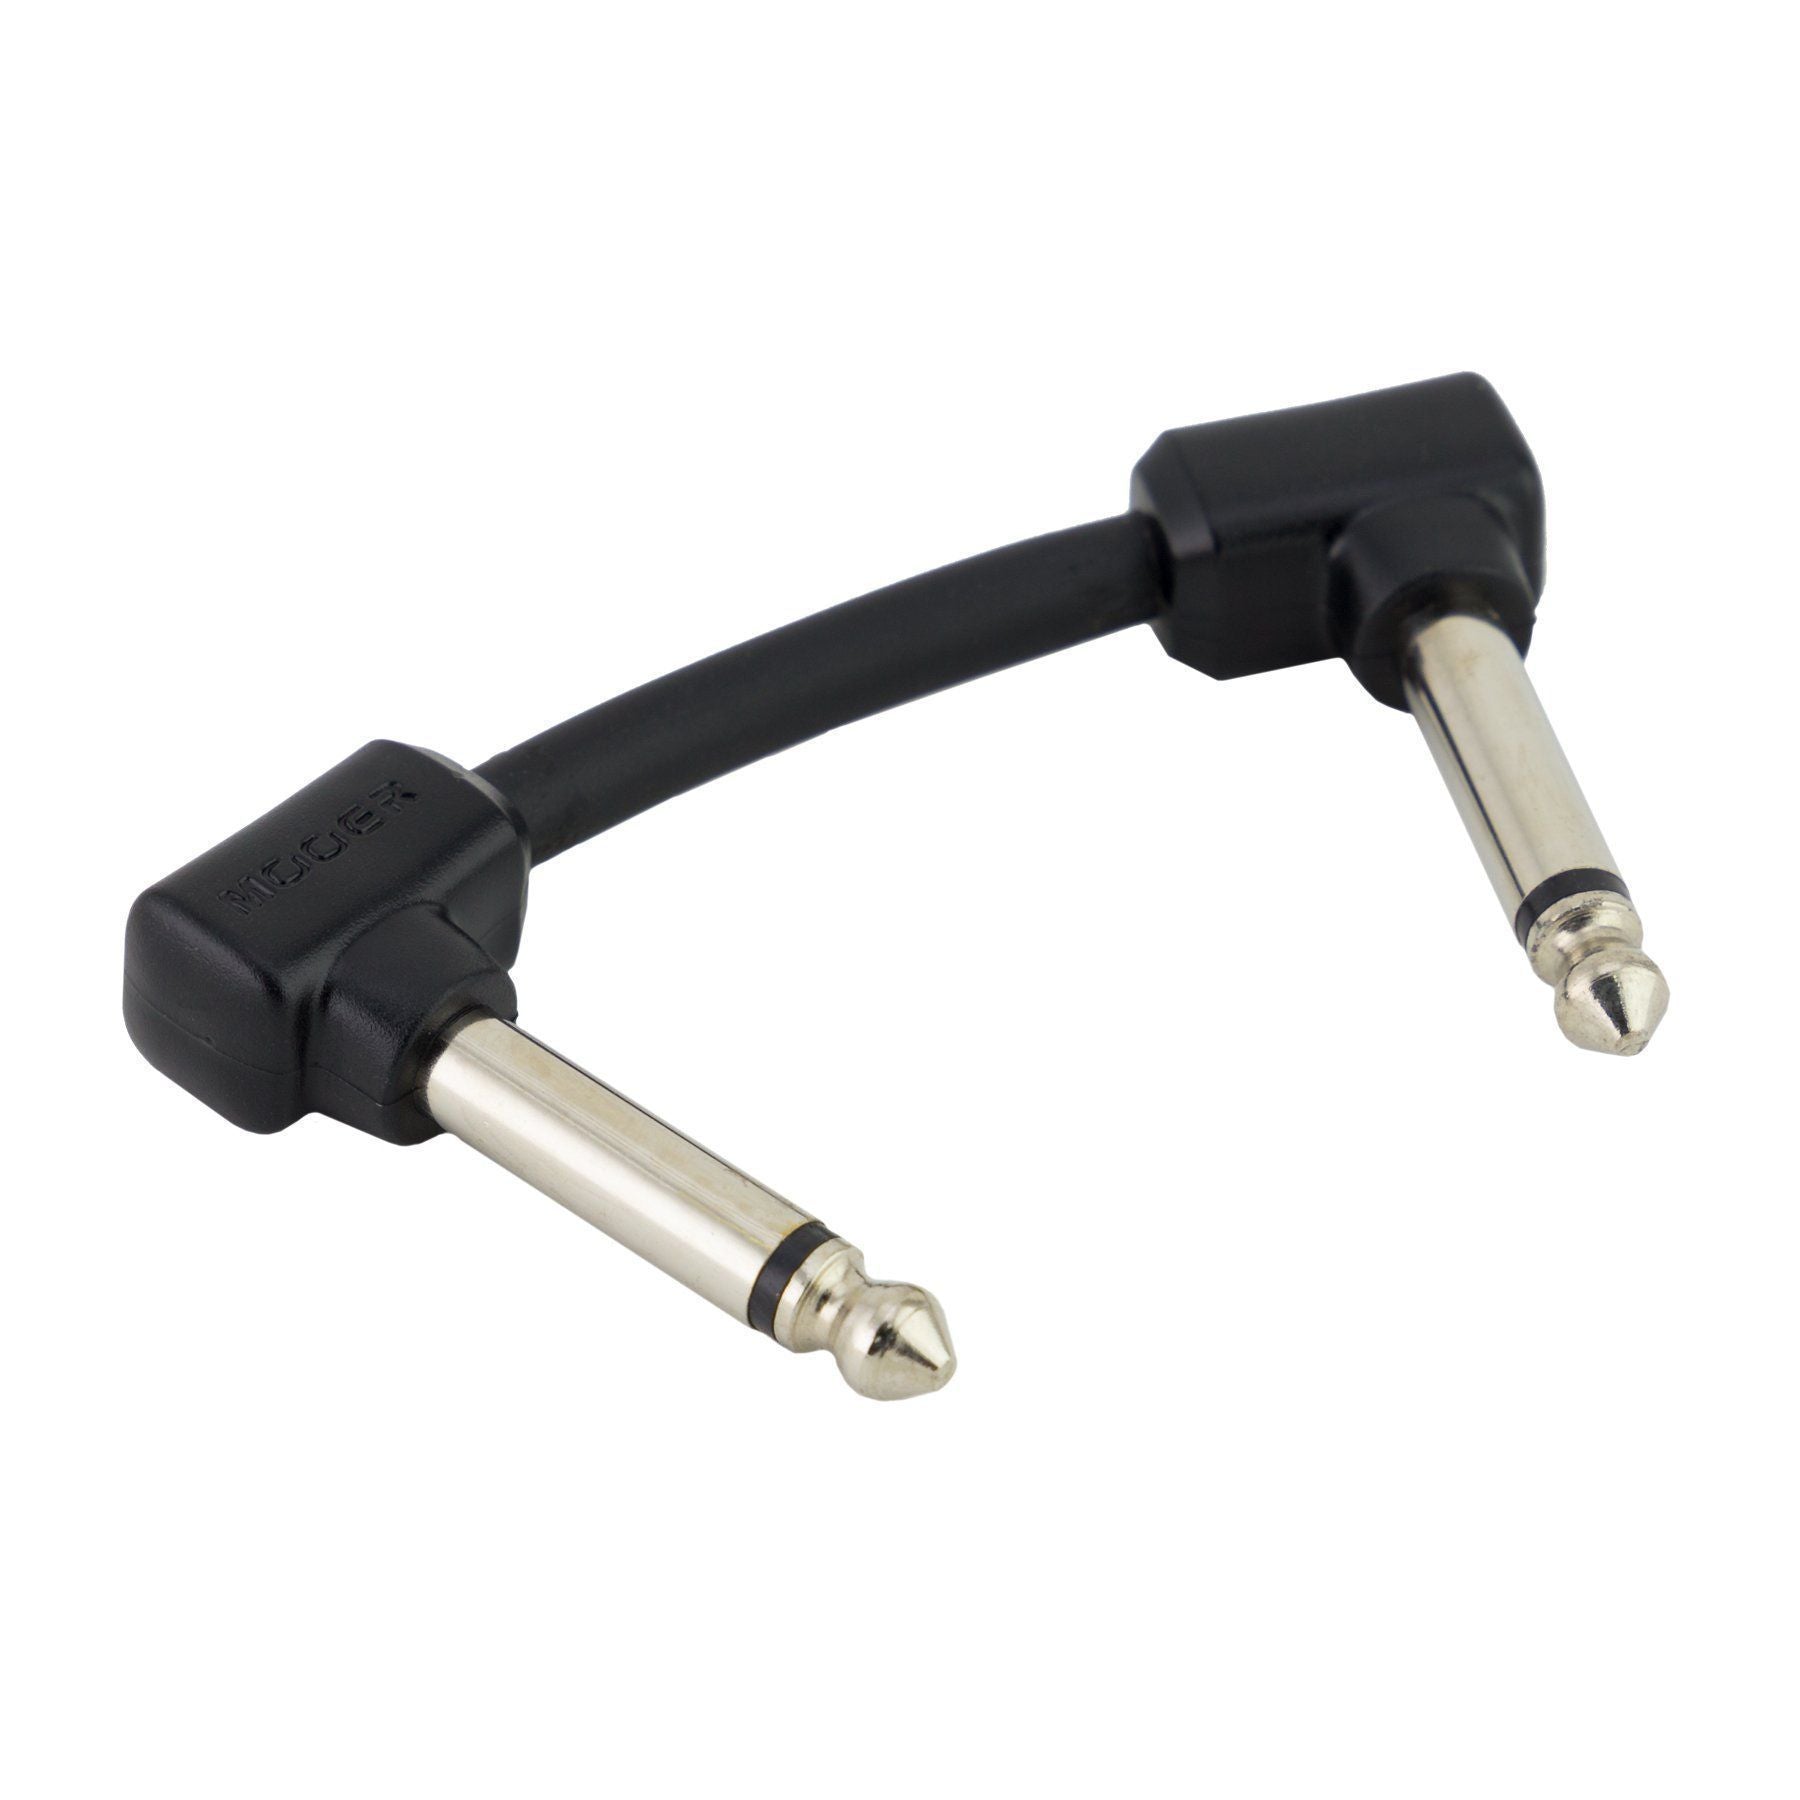 Mooer 2" Moulded Patch Cable-MEP-AC2